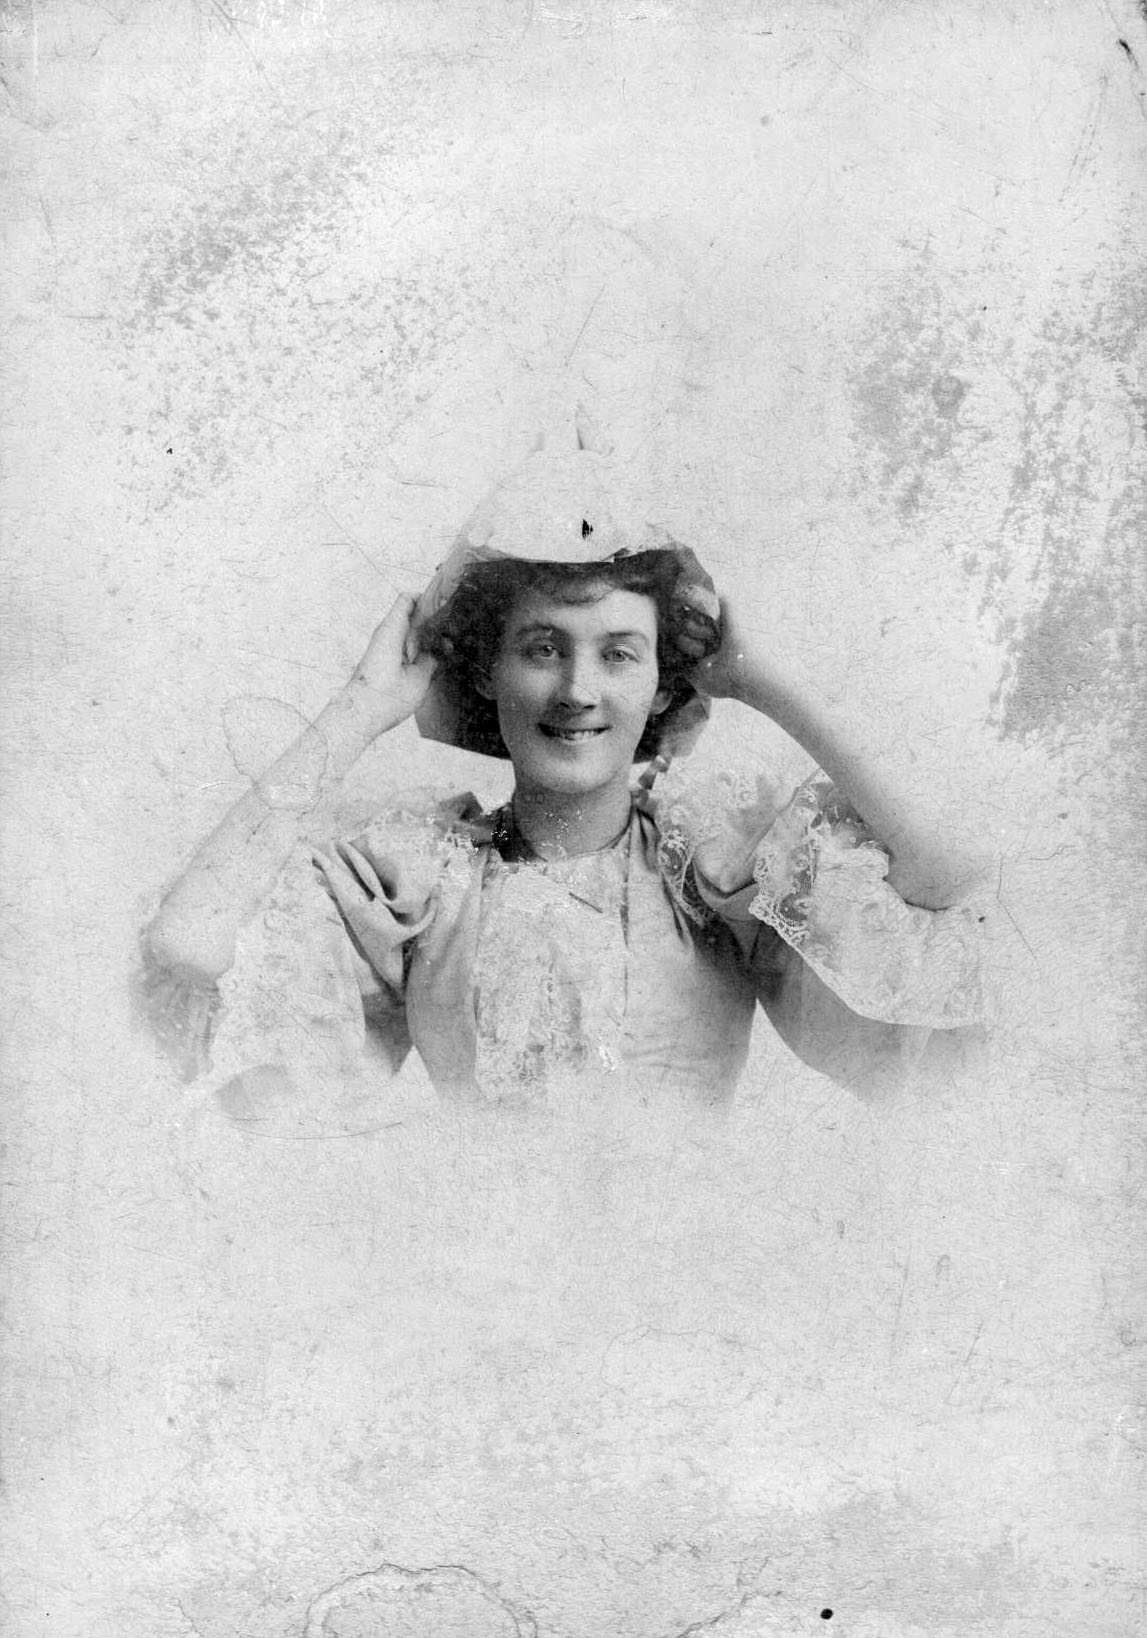 My wife's great aunt, Edna Moor, who came from Birmingham, Alabama.  She later had the ambition to become an opera singer and moved to New York.  This photo must be from the early 1920s and was taken in Sacramento, California, probably on a visit to her brother. View full size.